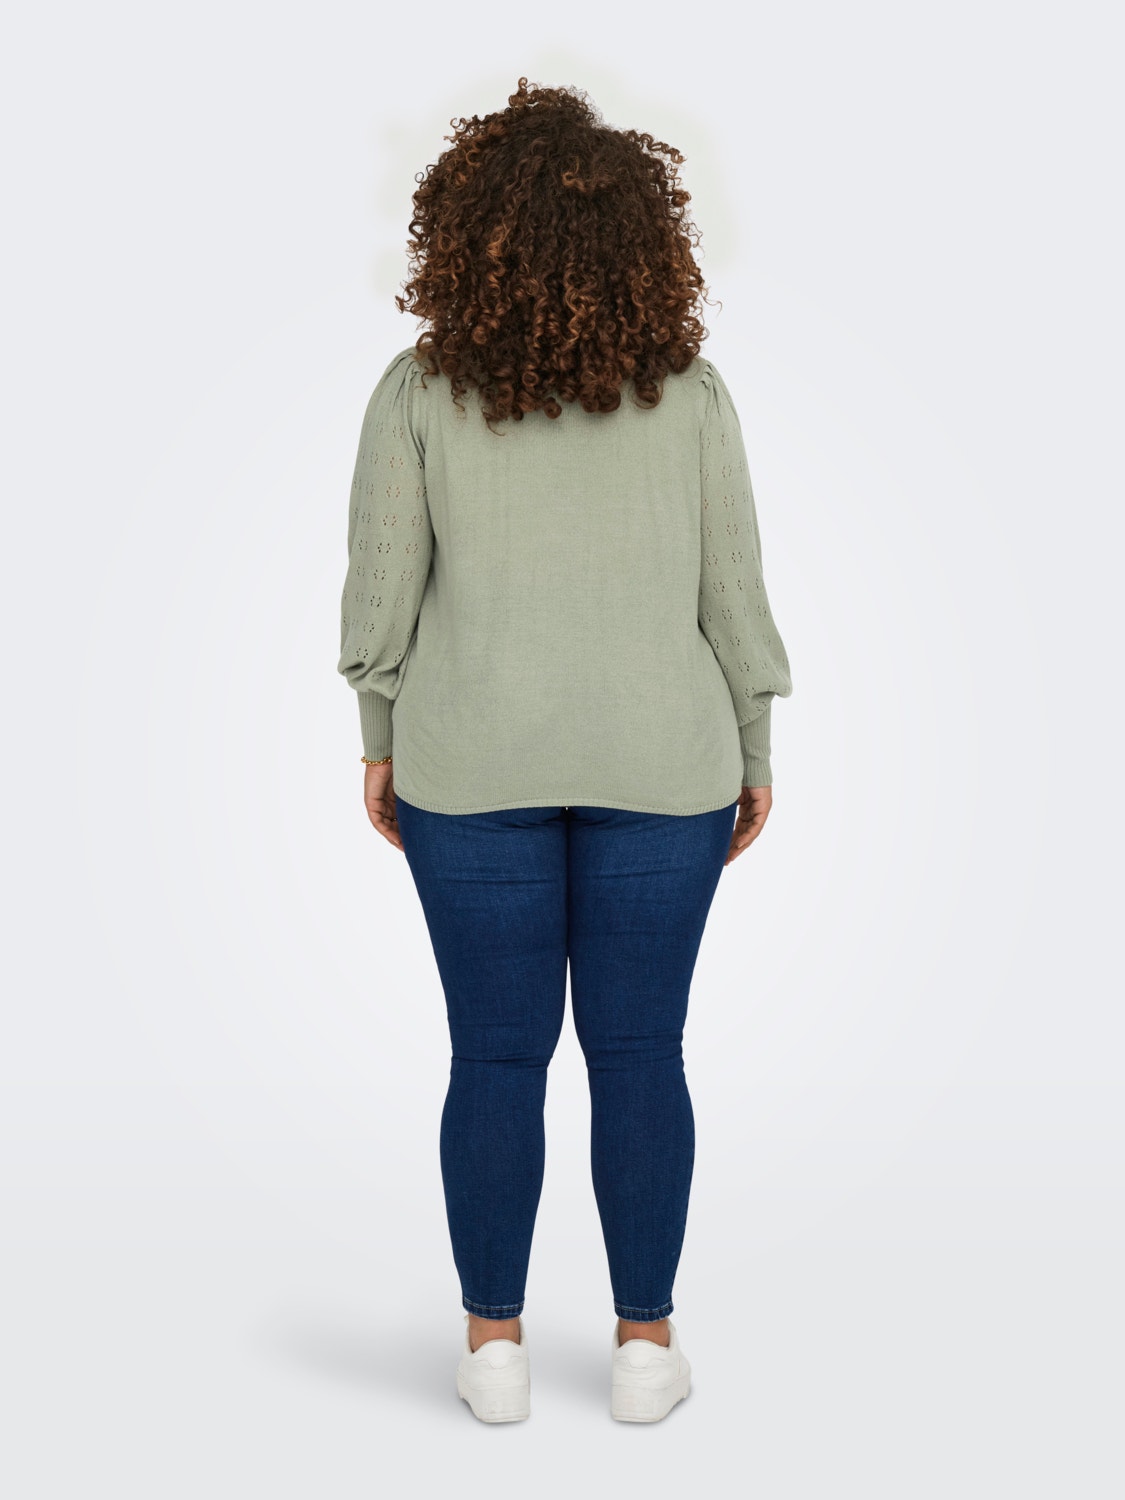 ONLY Curvy knitted Pullover -Seagrass - 15231765